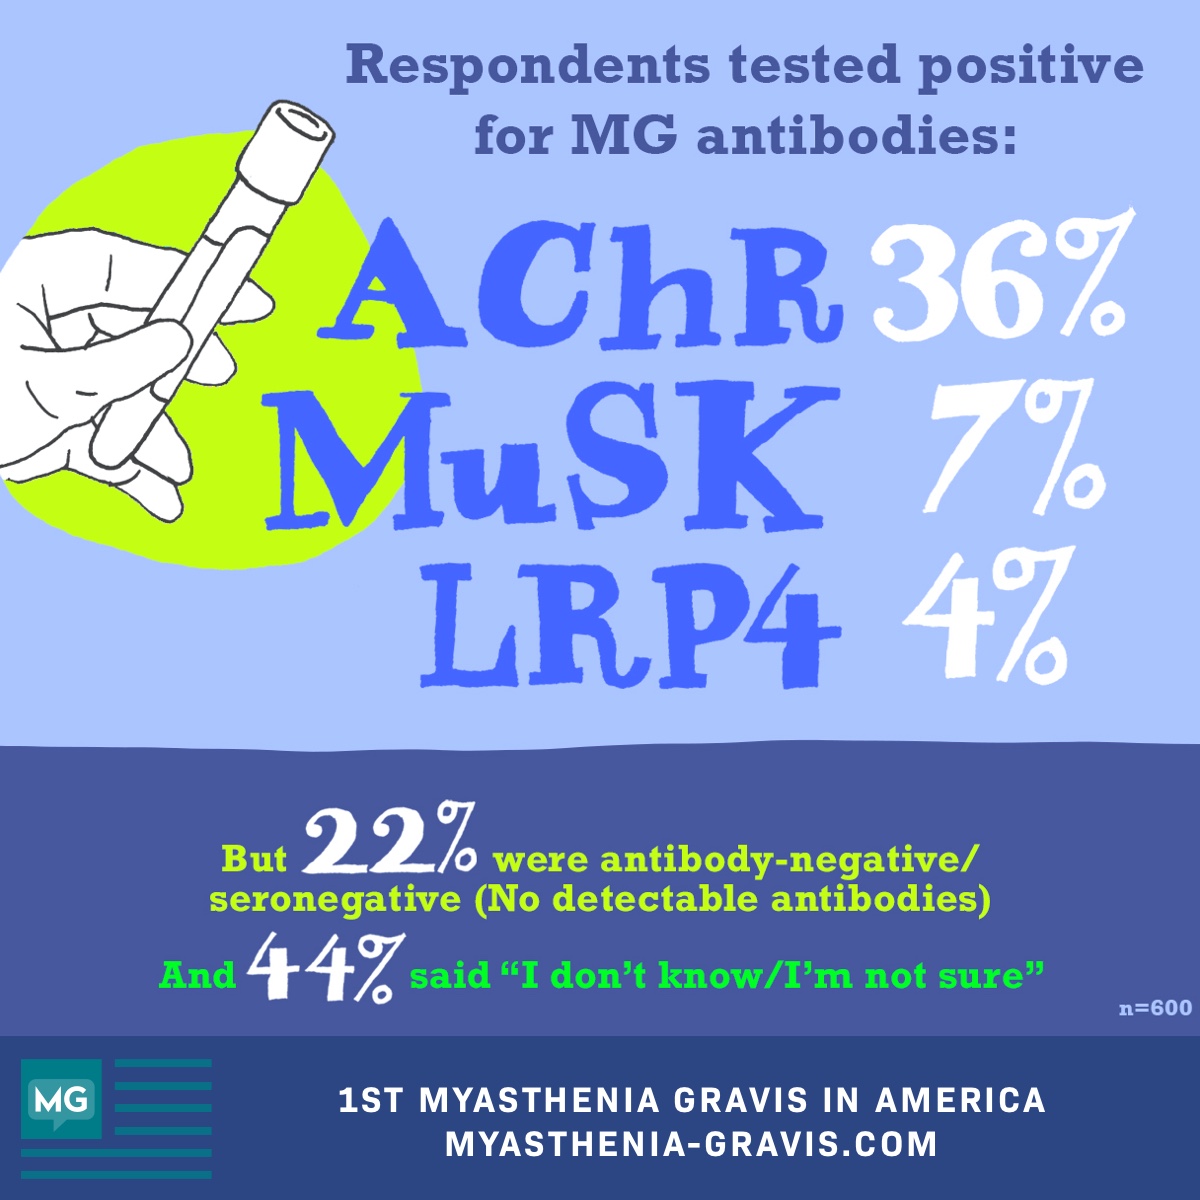 Respondents tested positive for MG antibodies, but 22% were seronegative, and 44% were unsure or did not know their type.